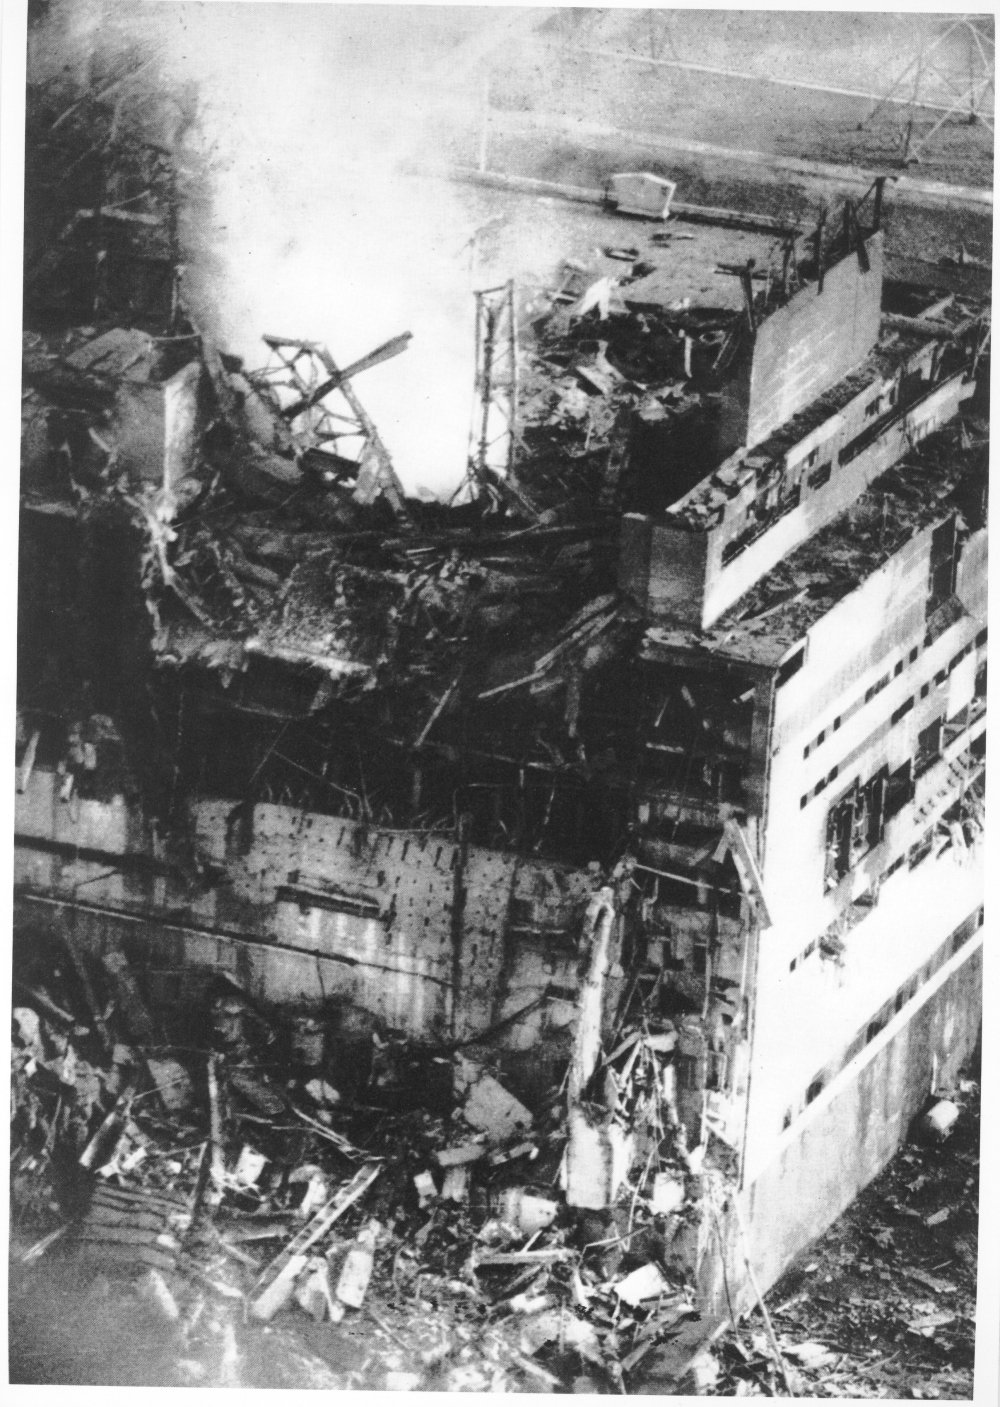 The first photograph of Unit Four after the accident, shot from a helicopter by Chernobyl plant photographer Anatoly Rasskazov, at approximately 3.00pm on April 26 1986 (Anatoly Rasskazov/Ukrainian National Chernobyl Museum)